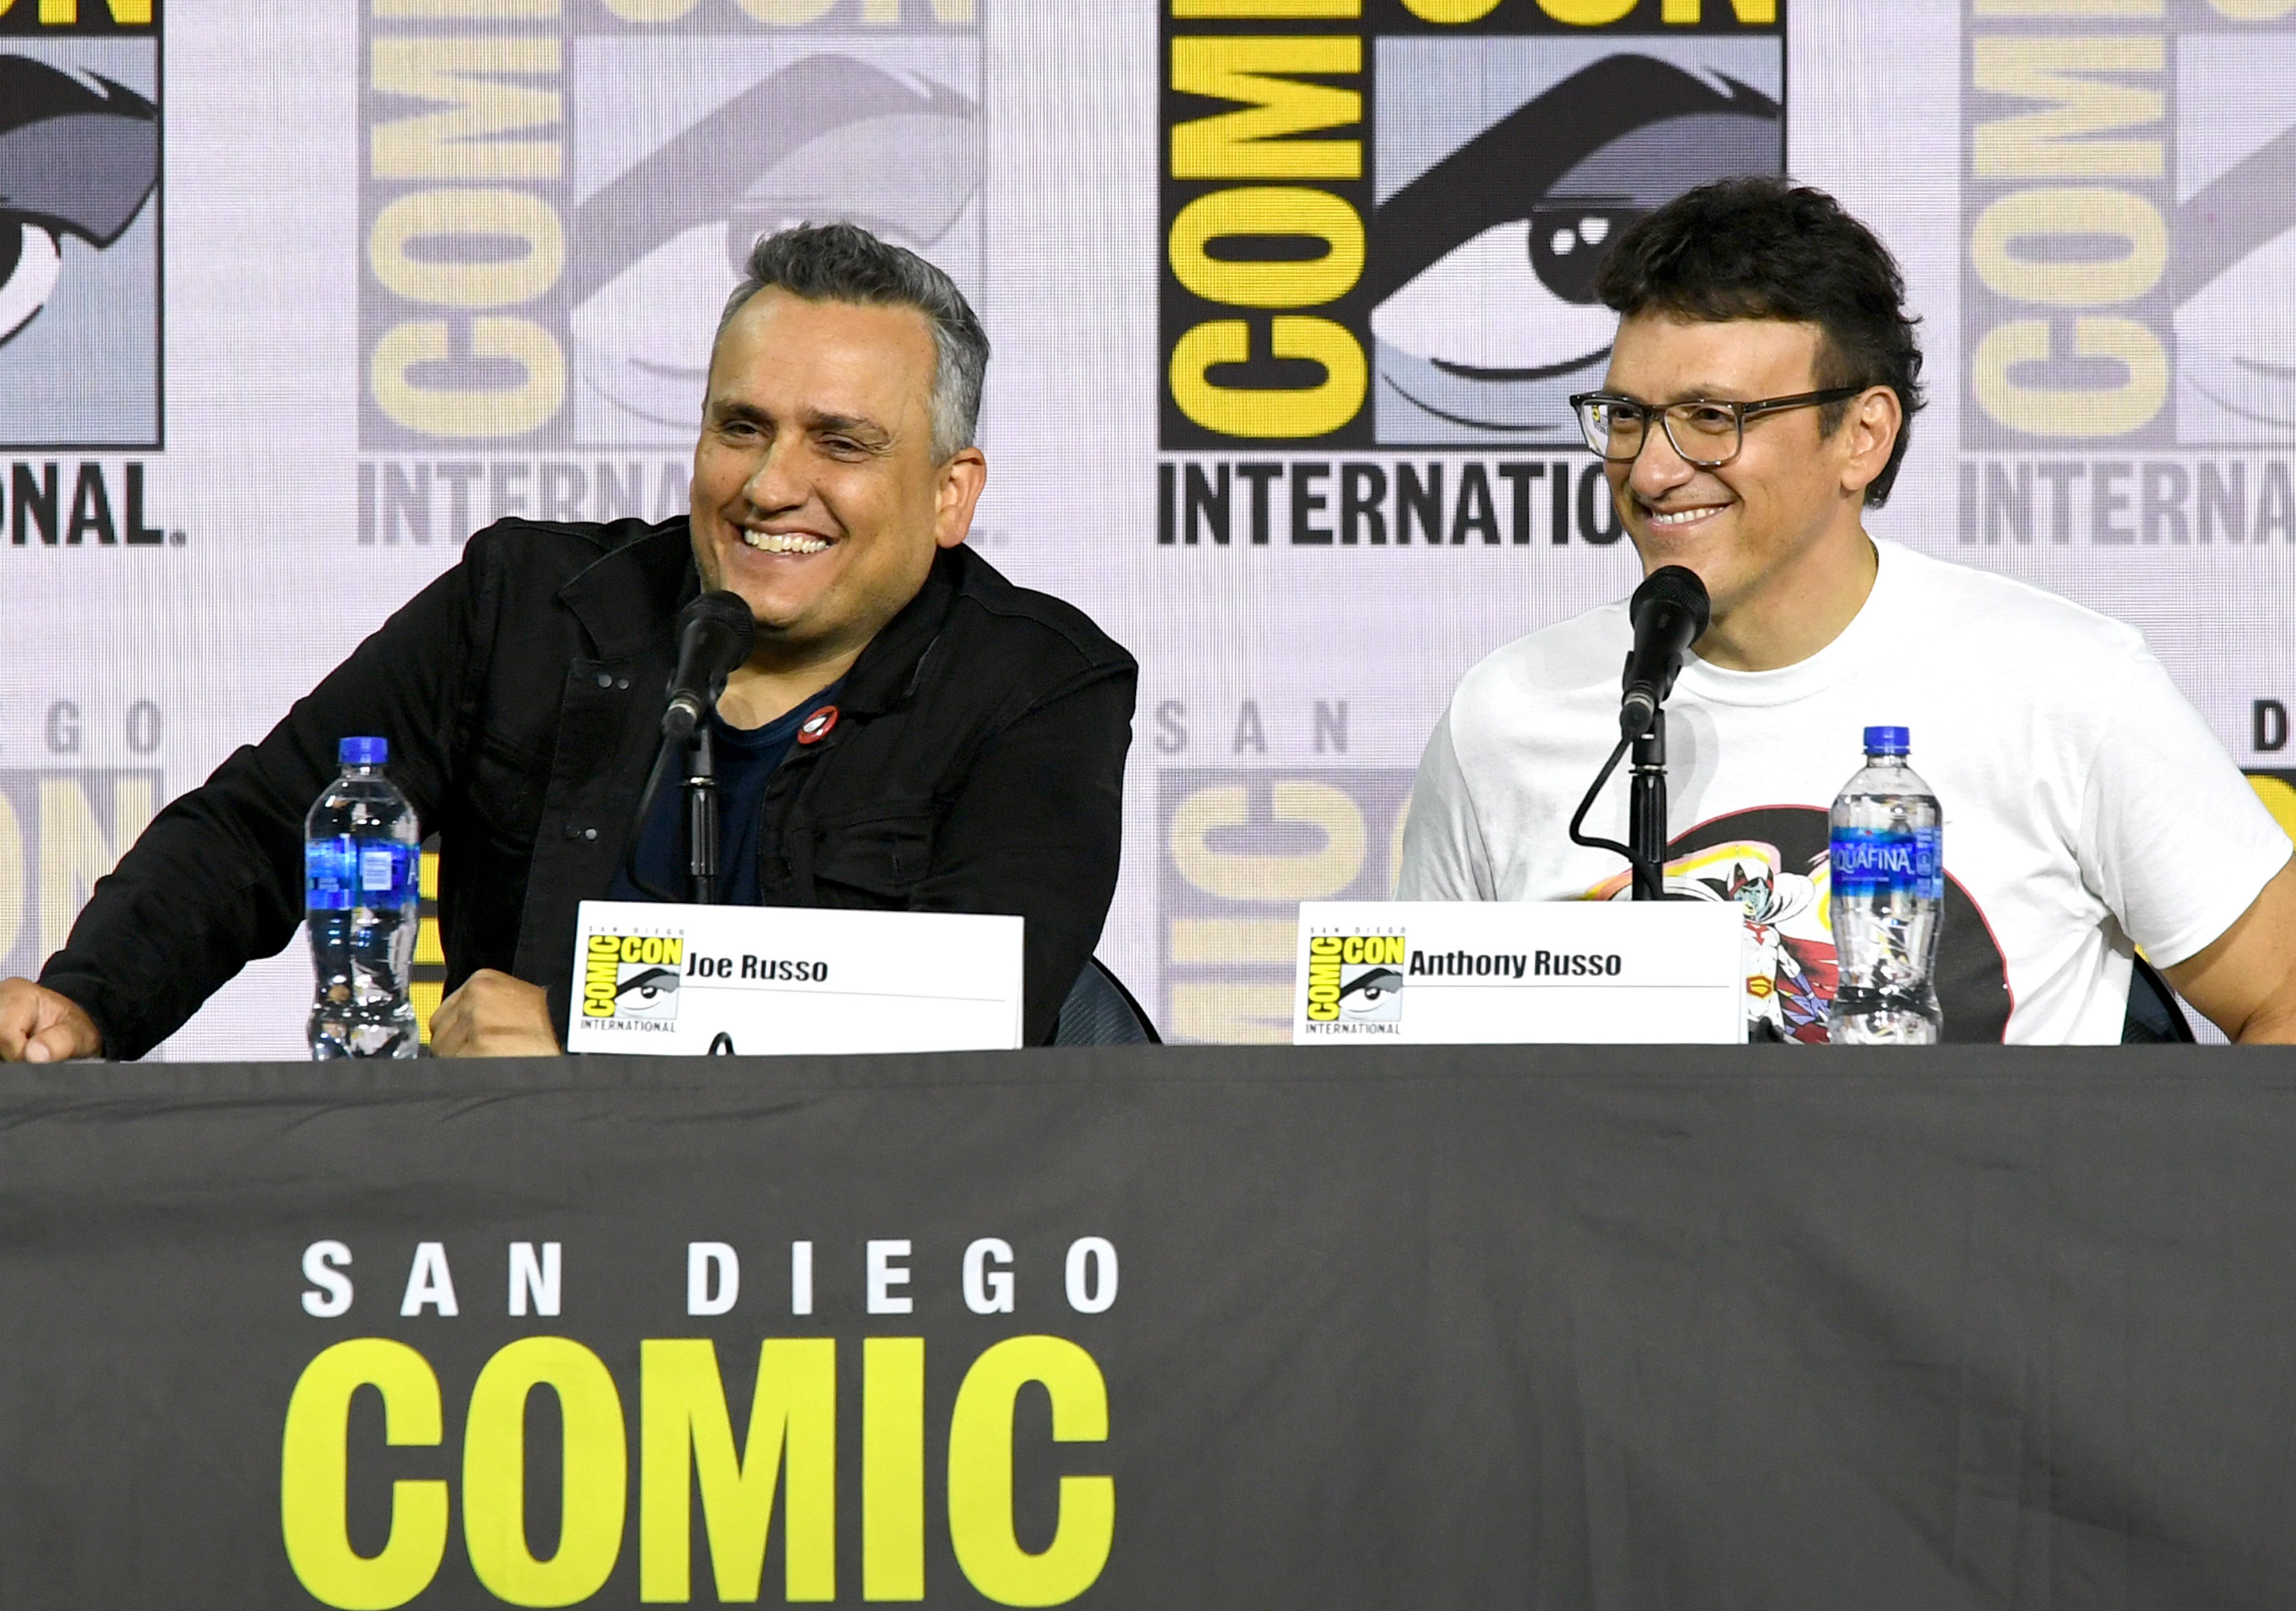 Joe Russo and Anthony Russo speak at the writing Avengers Endgame panel at the 2019 Comic-Con